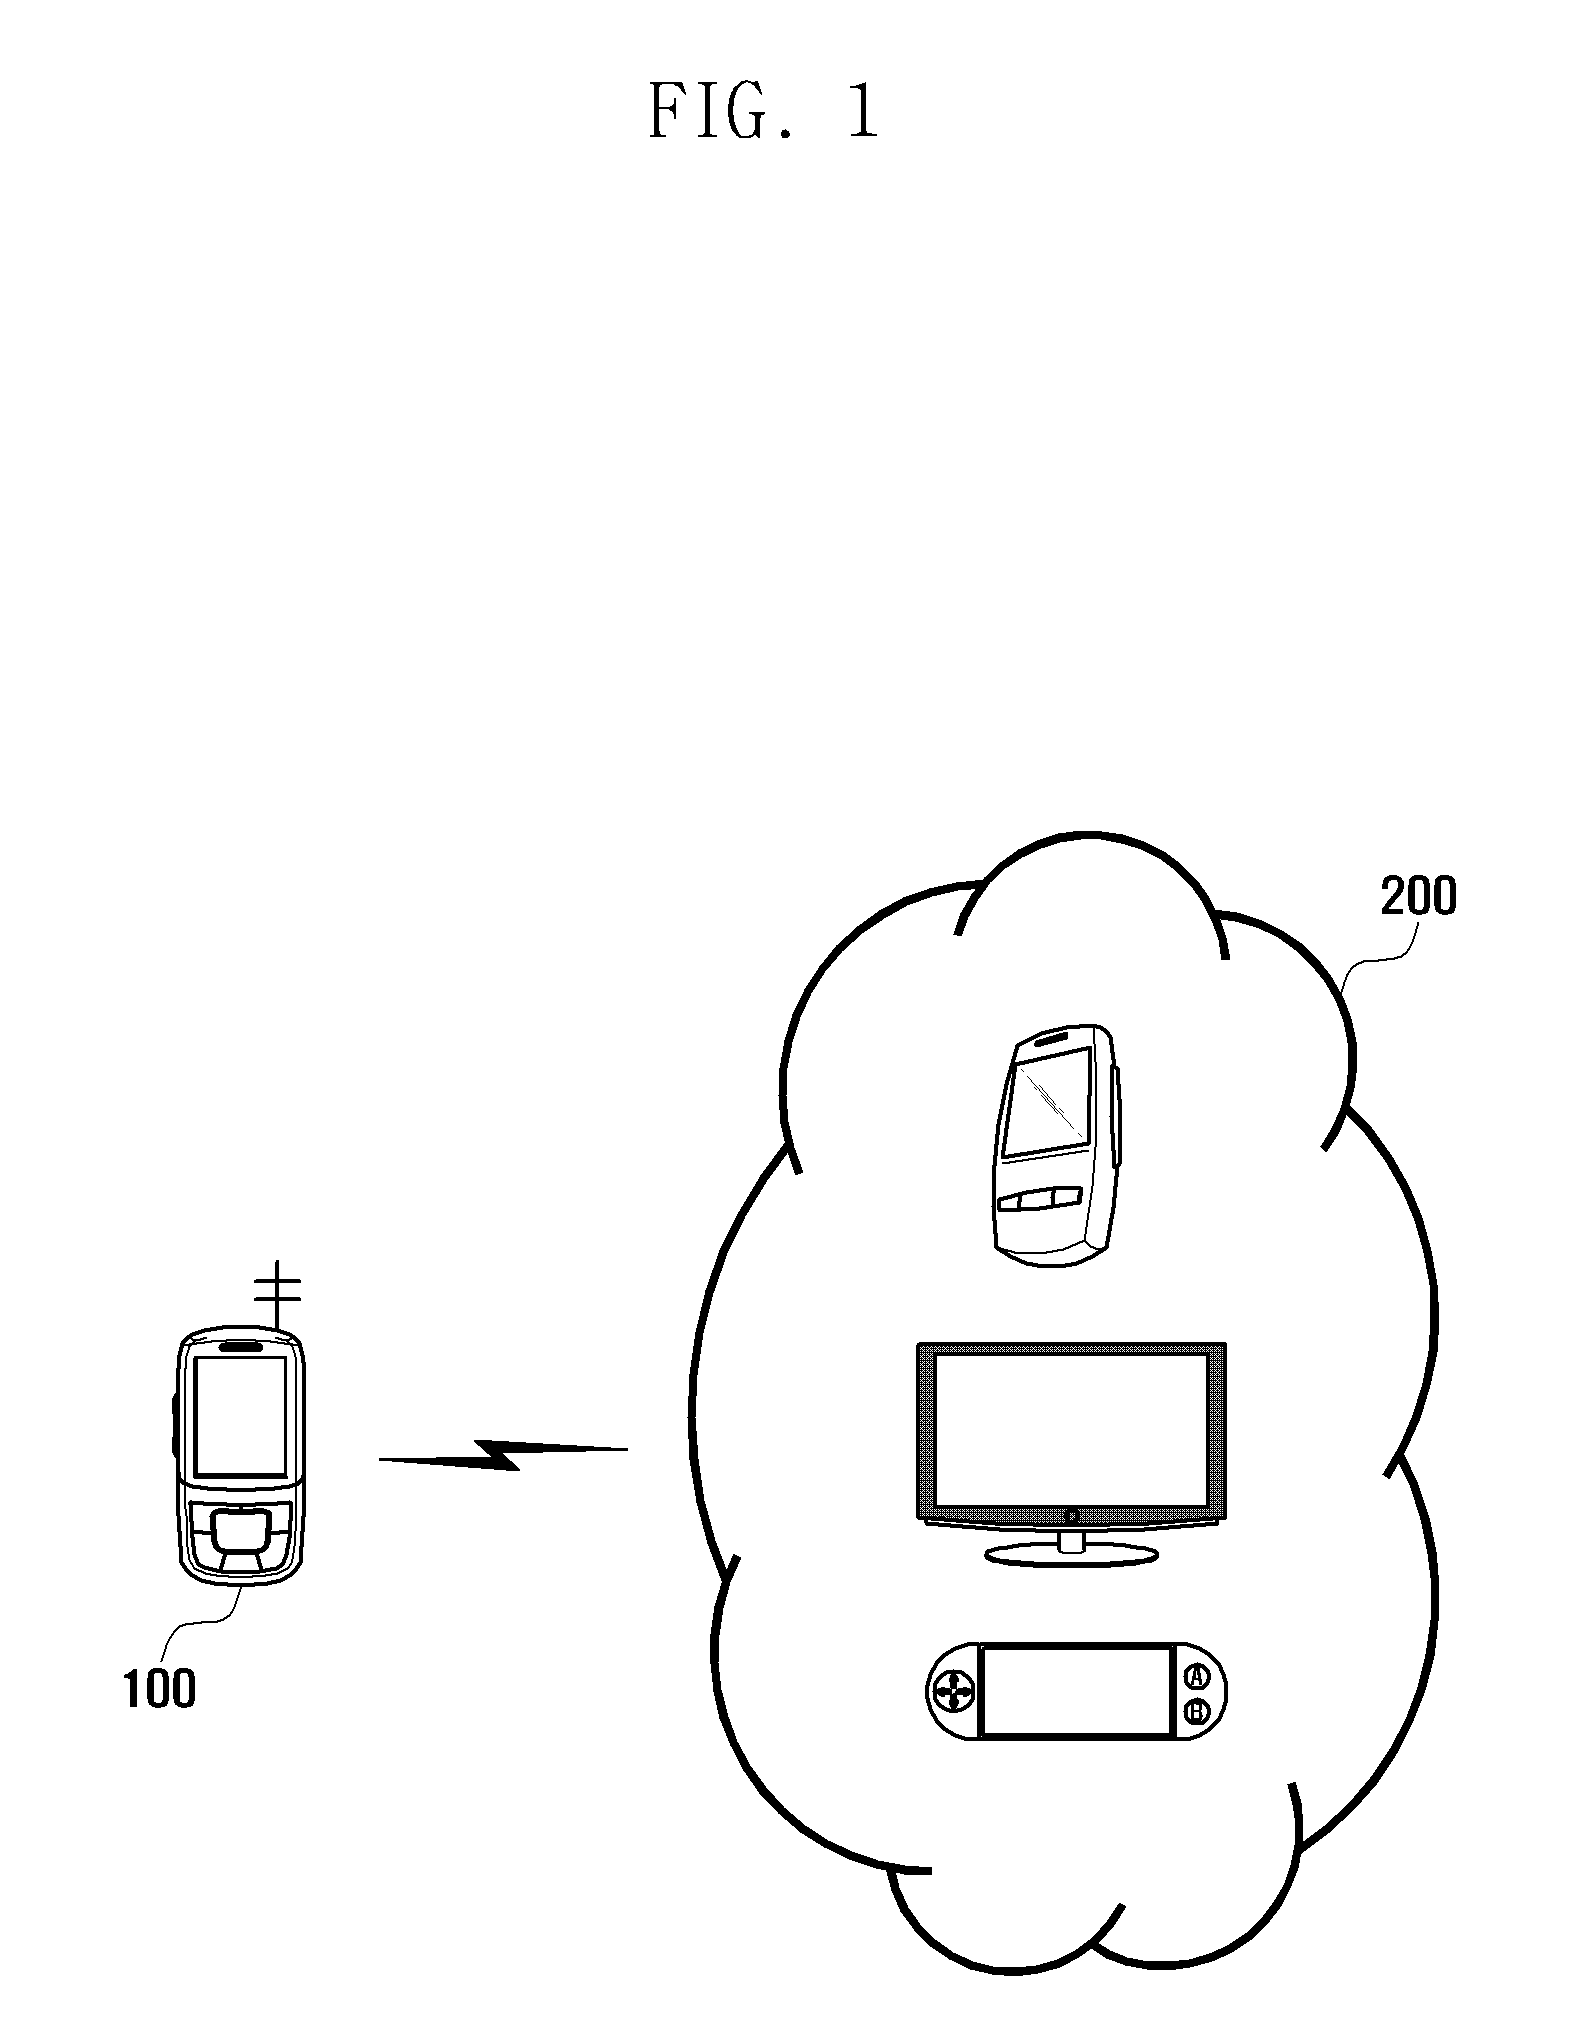 Method and system for providing wi-fi service by wi-fi device